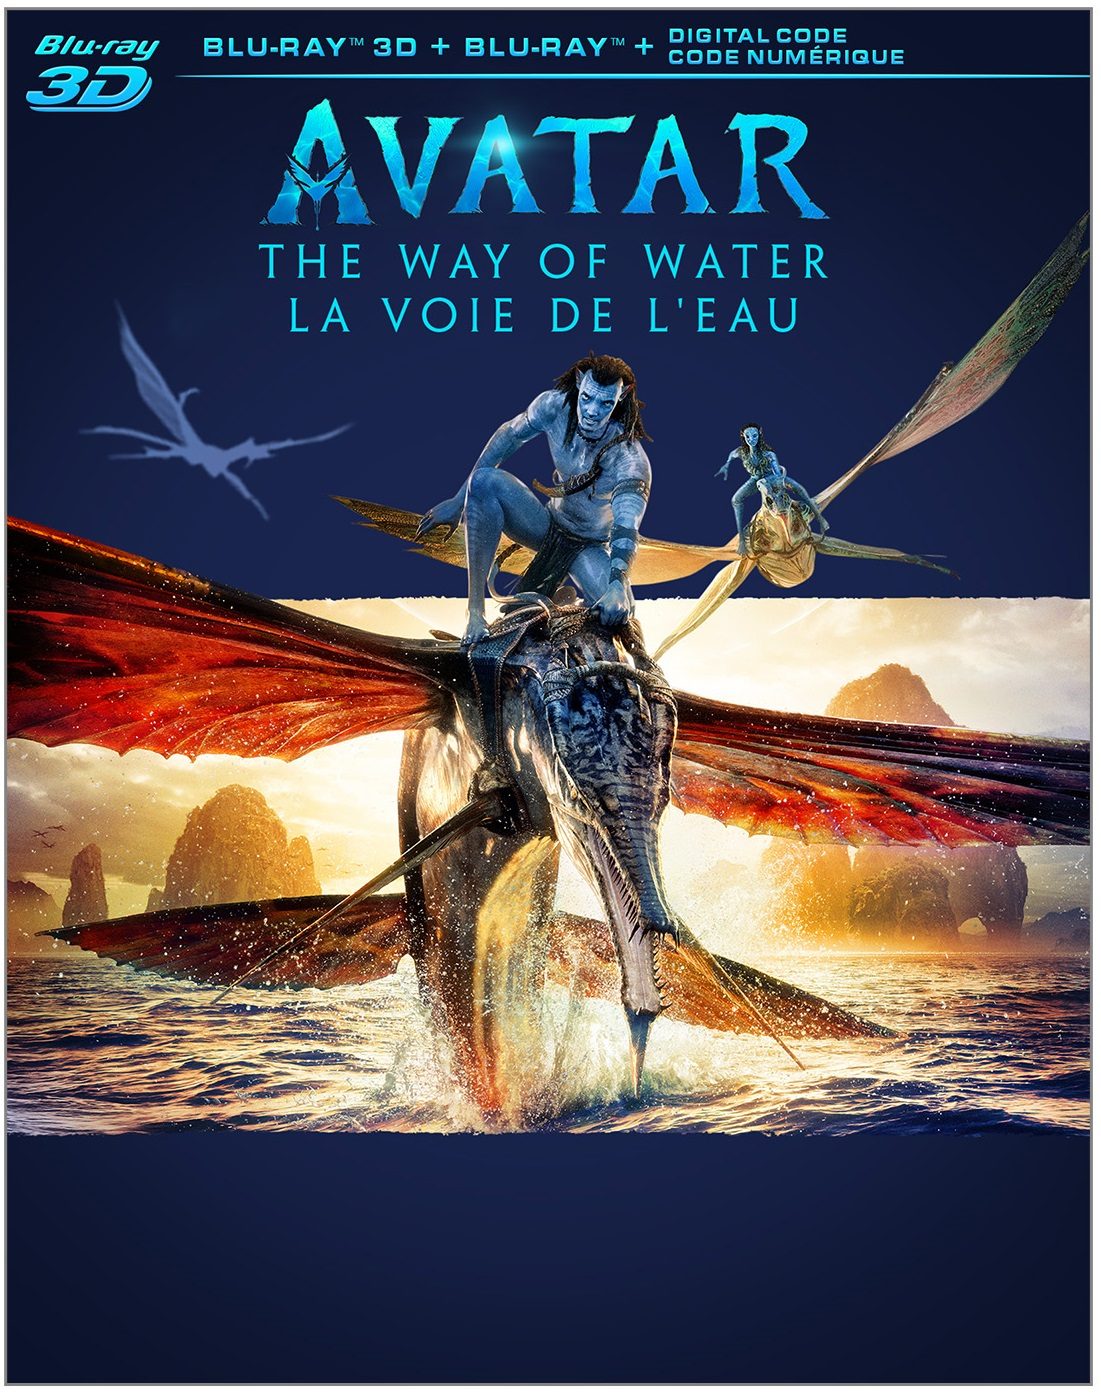 Avatar: The Way of Water 3D (Blu-ray) on MovieShack